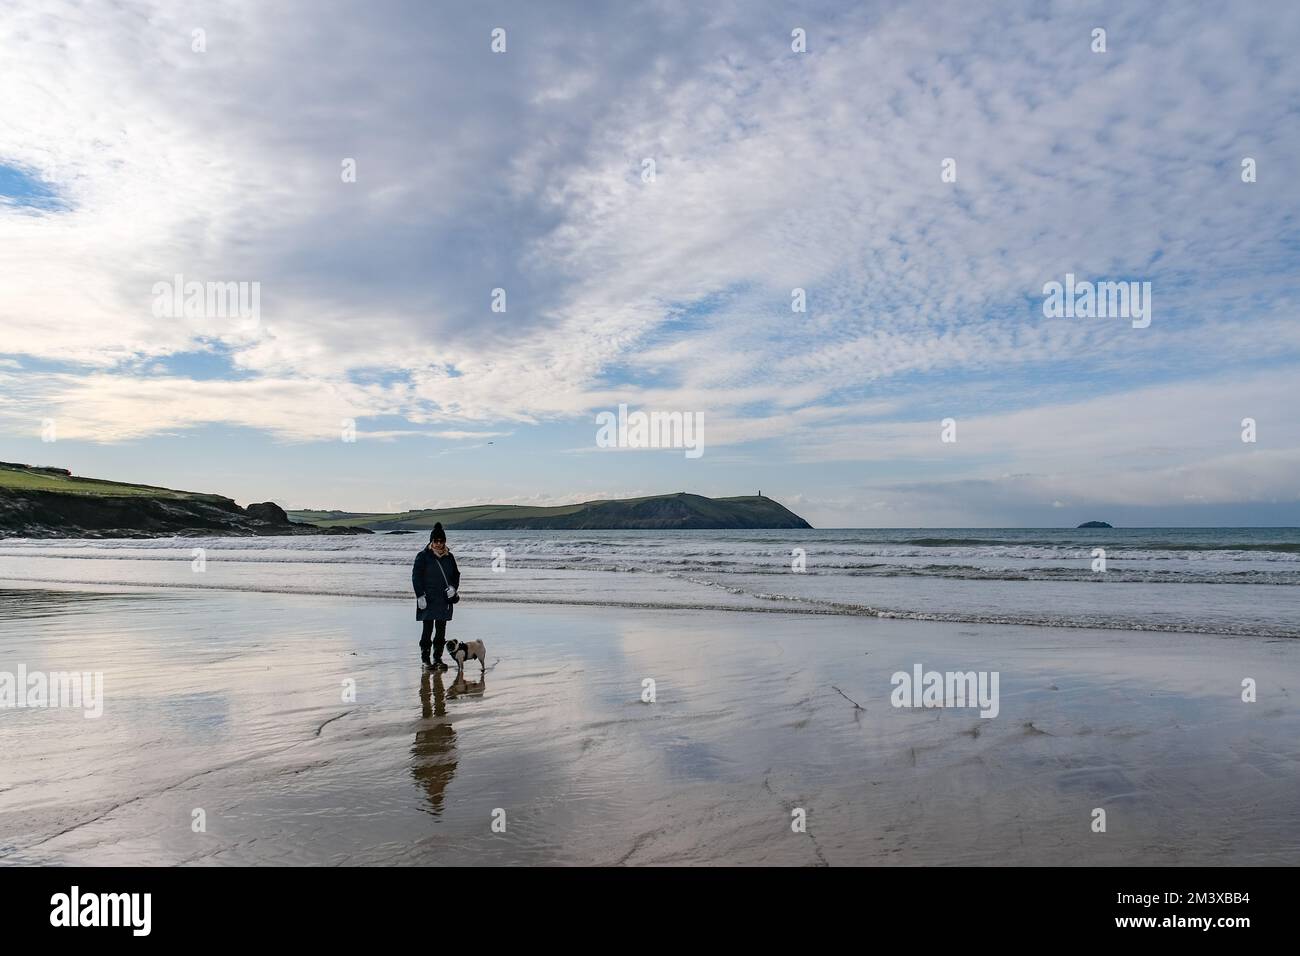 Polzeath, Cornwall, UK. 17th December 2022. UK Weather. After overnight frost again, it was a pleasant 8 degrees C on the beach at Polzeath this lunchtime.  Credit Simon Maycock / Alamy Live News. Stock Photo